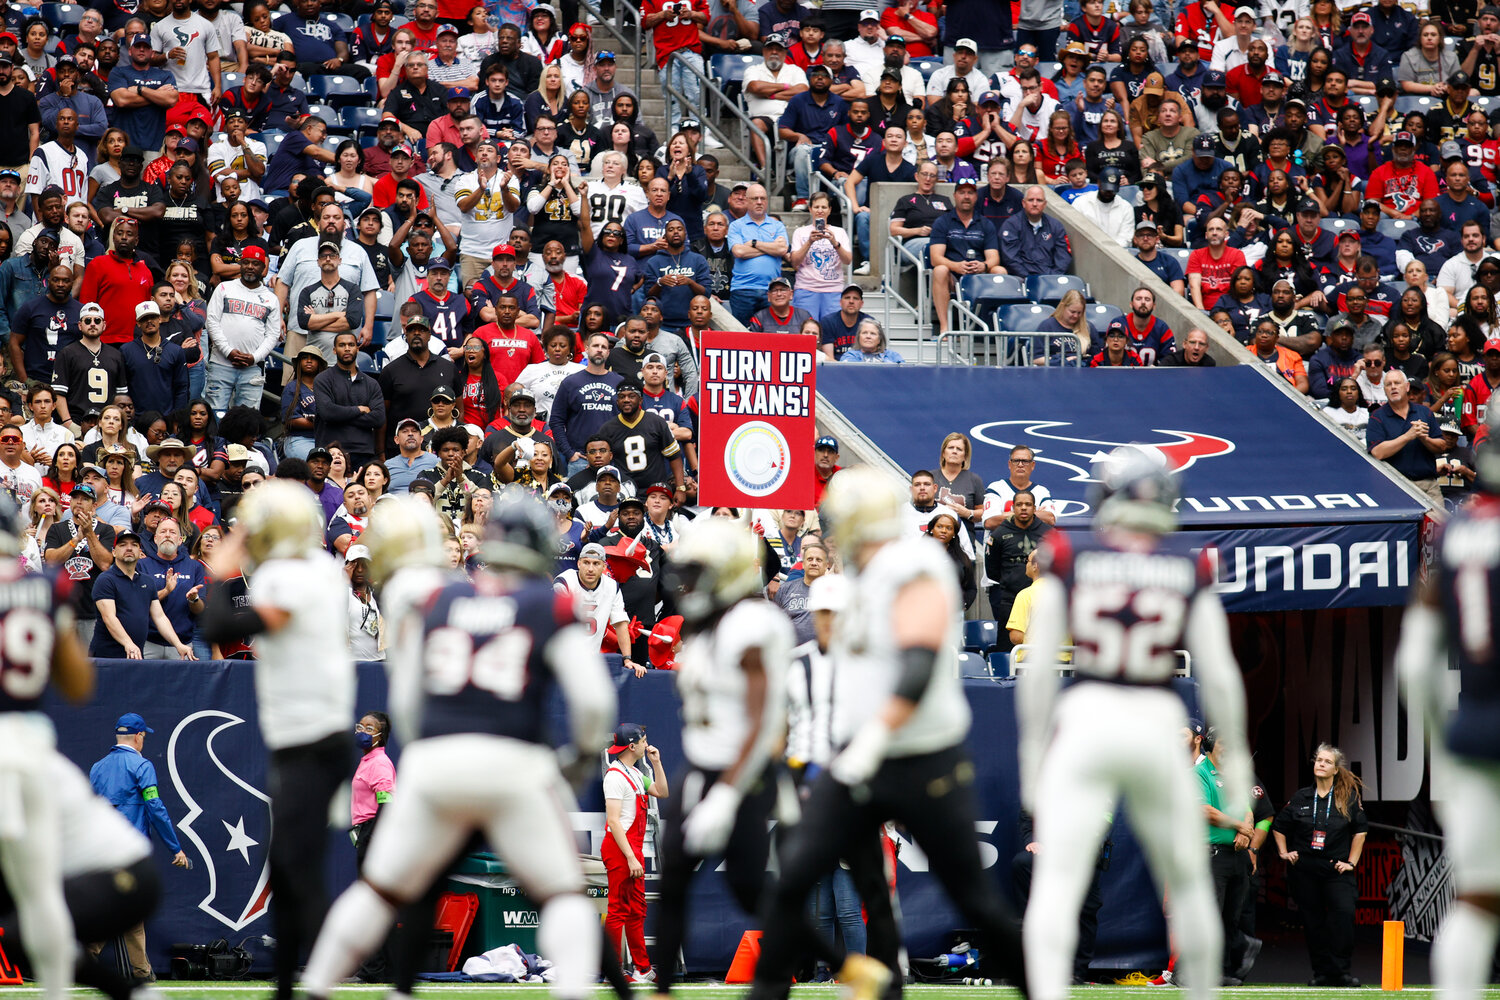 Texans fans cheer during the Saints’ last-chance drive late in the fourth quarter of an NFL game between the Texans and the Saints on October 15, 2023 in Houston. The Texans won, 20-13.